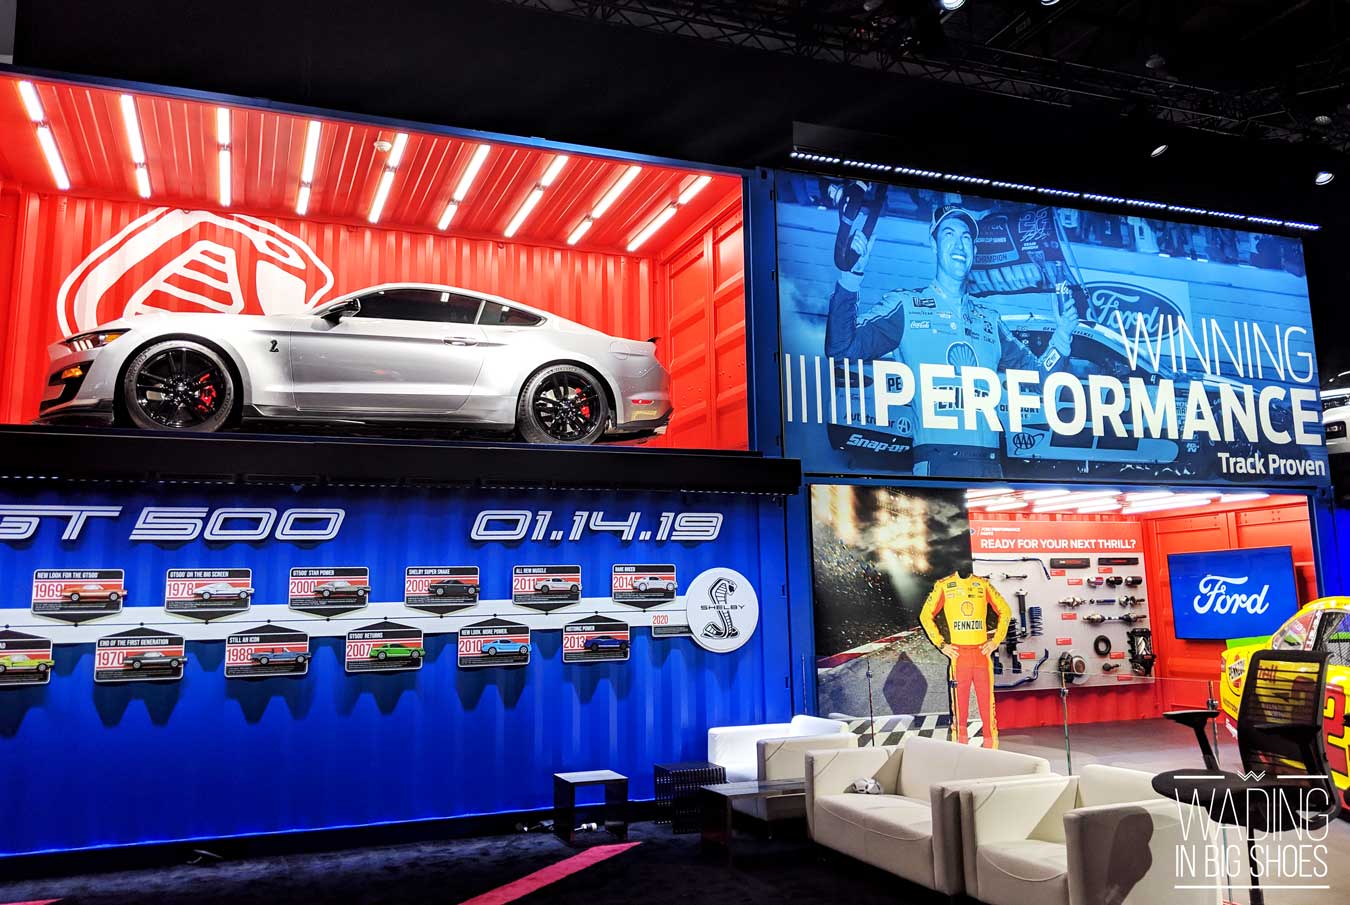 Detroit Auto Show 2019 Highlights: Must-See Cars + Best Interactive Exhibits (via Wading in Big Shoes)